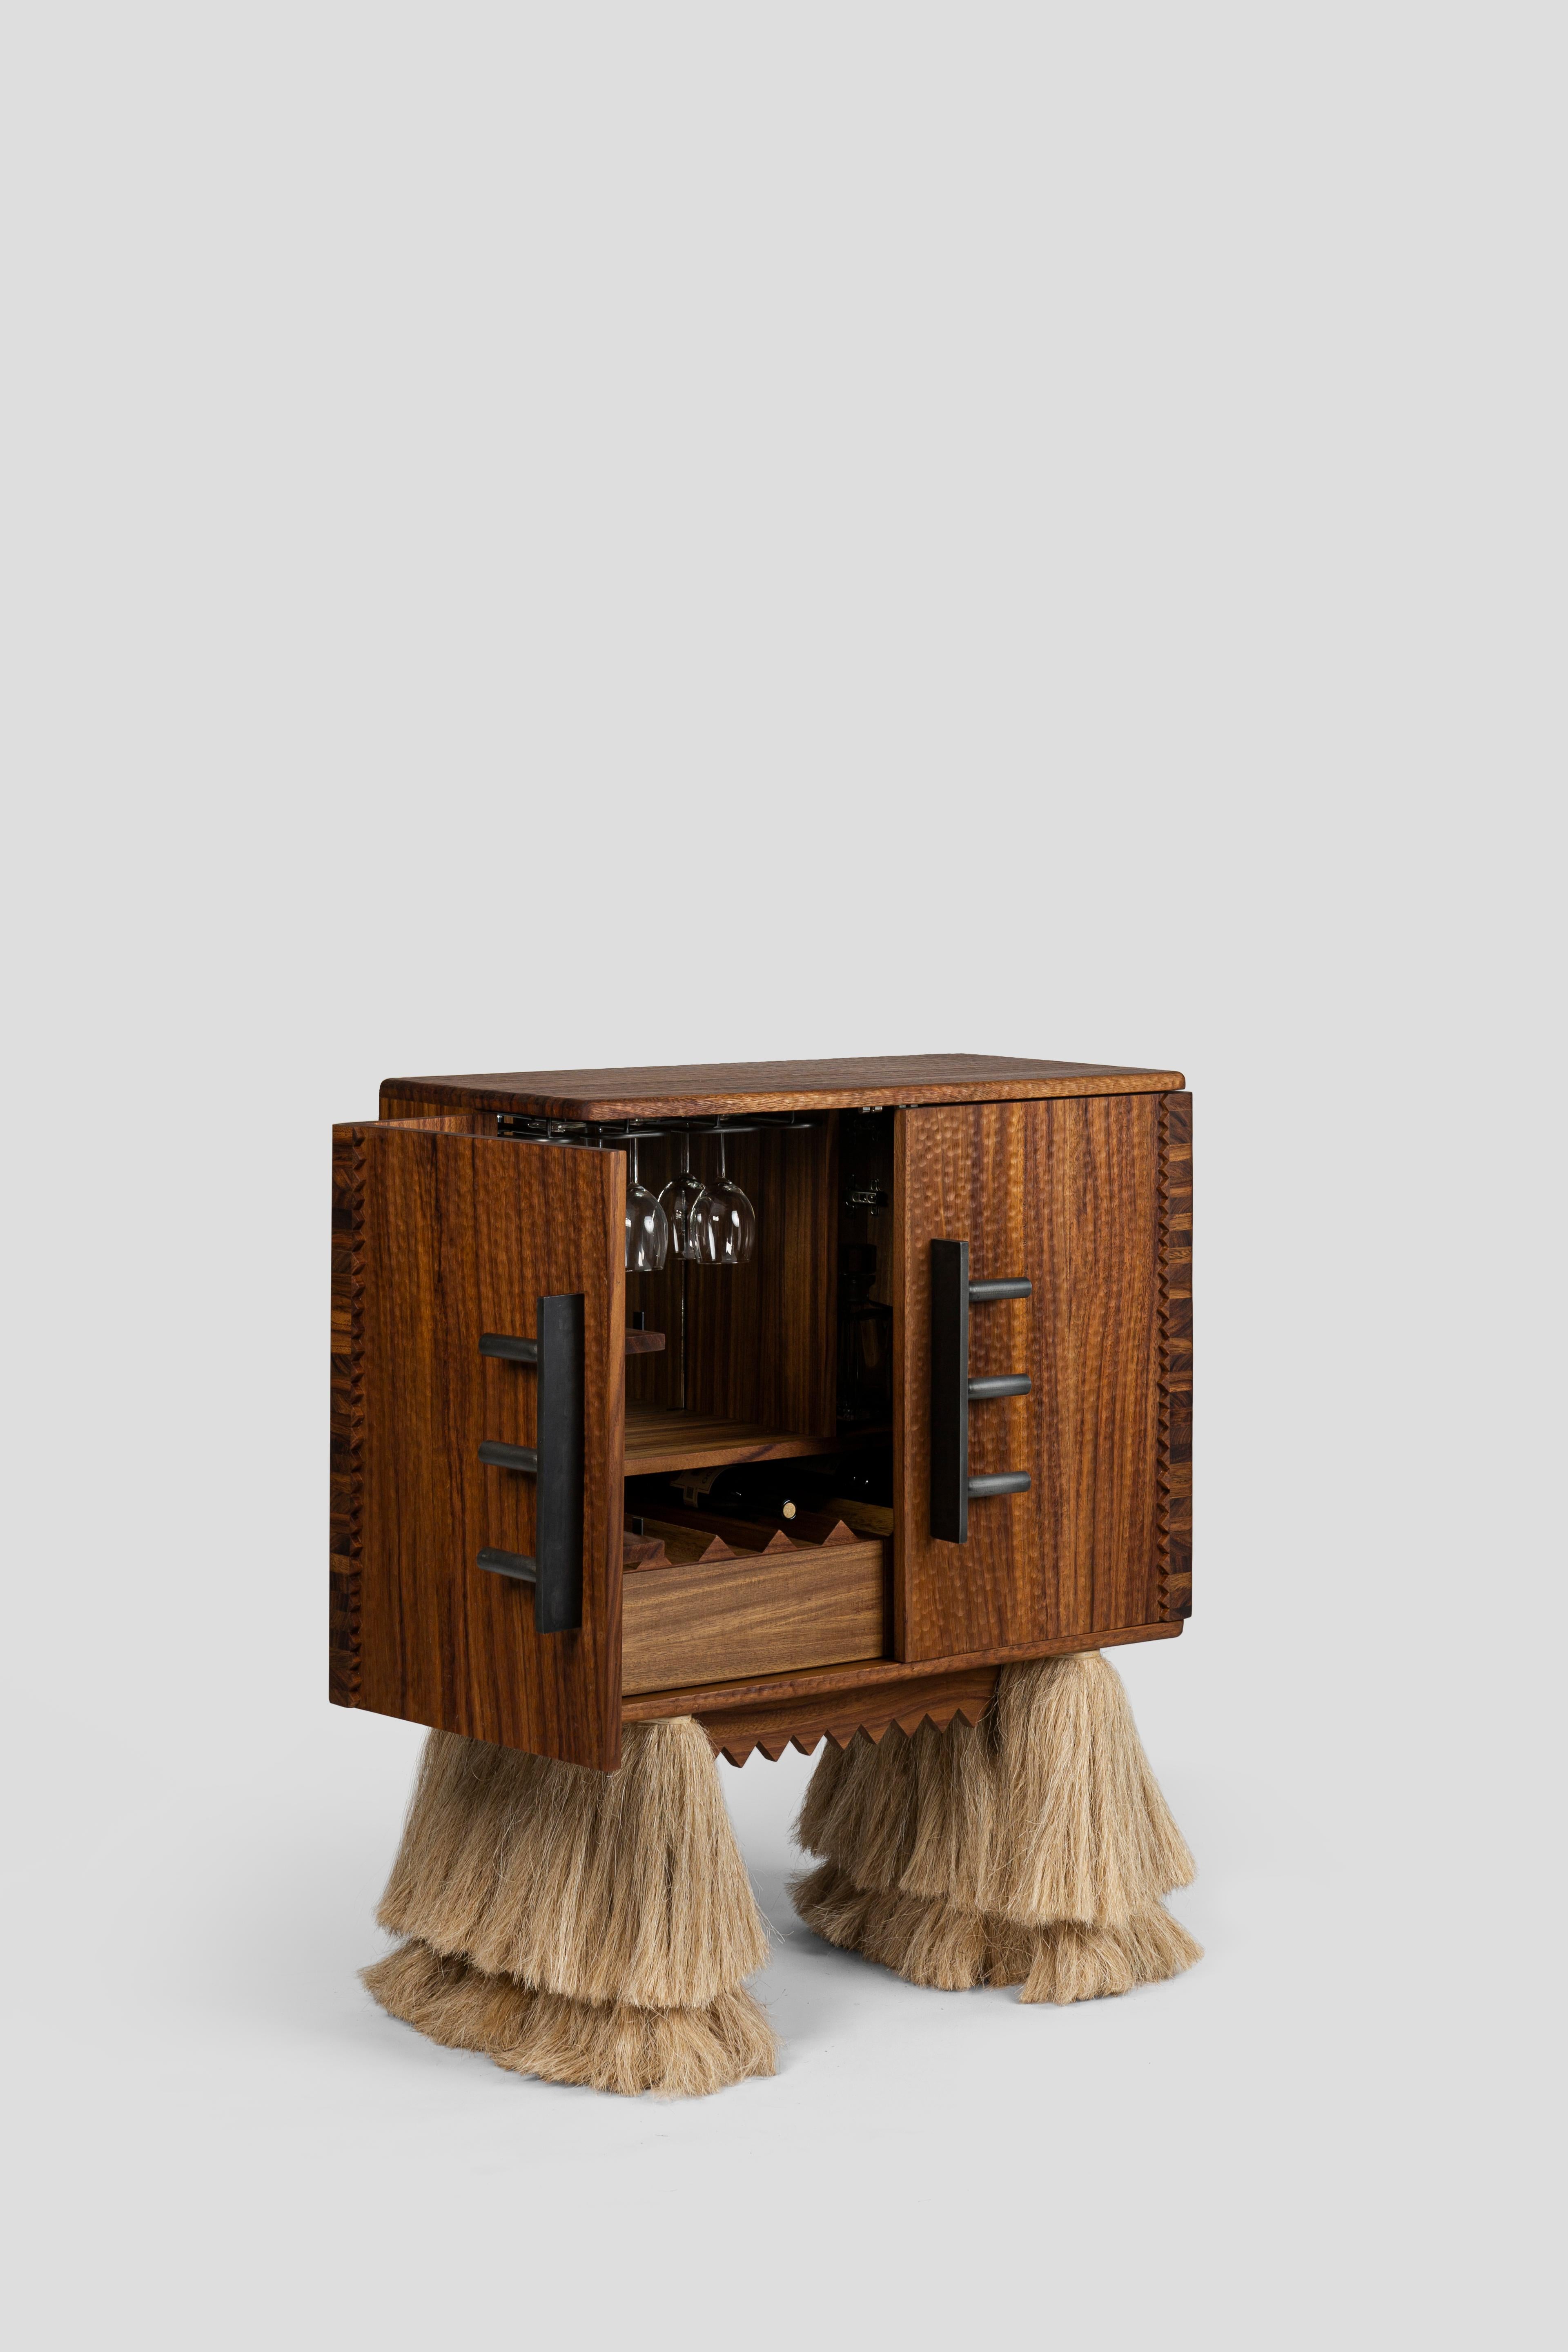 
Carmen is a bartender, a storage cabinet with a functional design. Inside, it has a pair of drawers for storing objects, space for bottles, compartments for glasses and a cup holder. When the doors are opened, the sides of the cabinet reveal